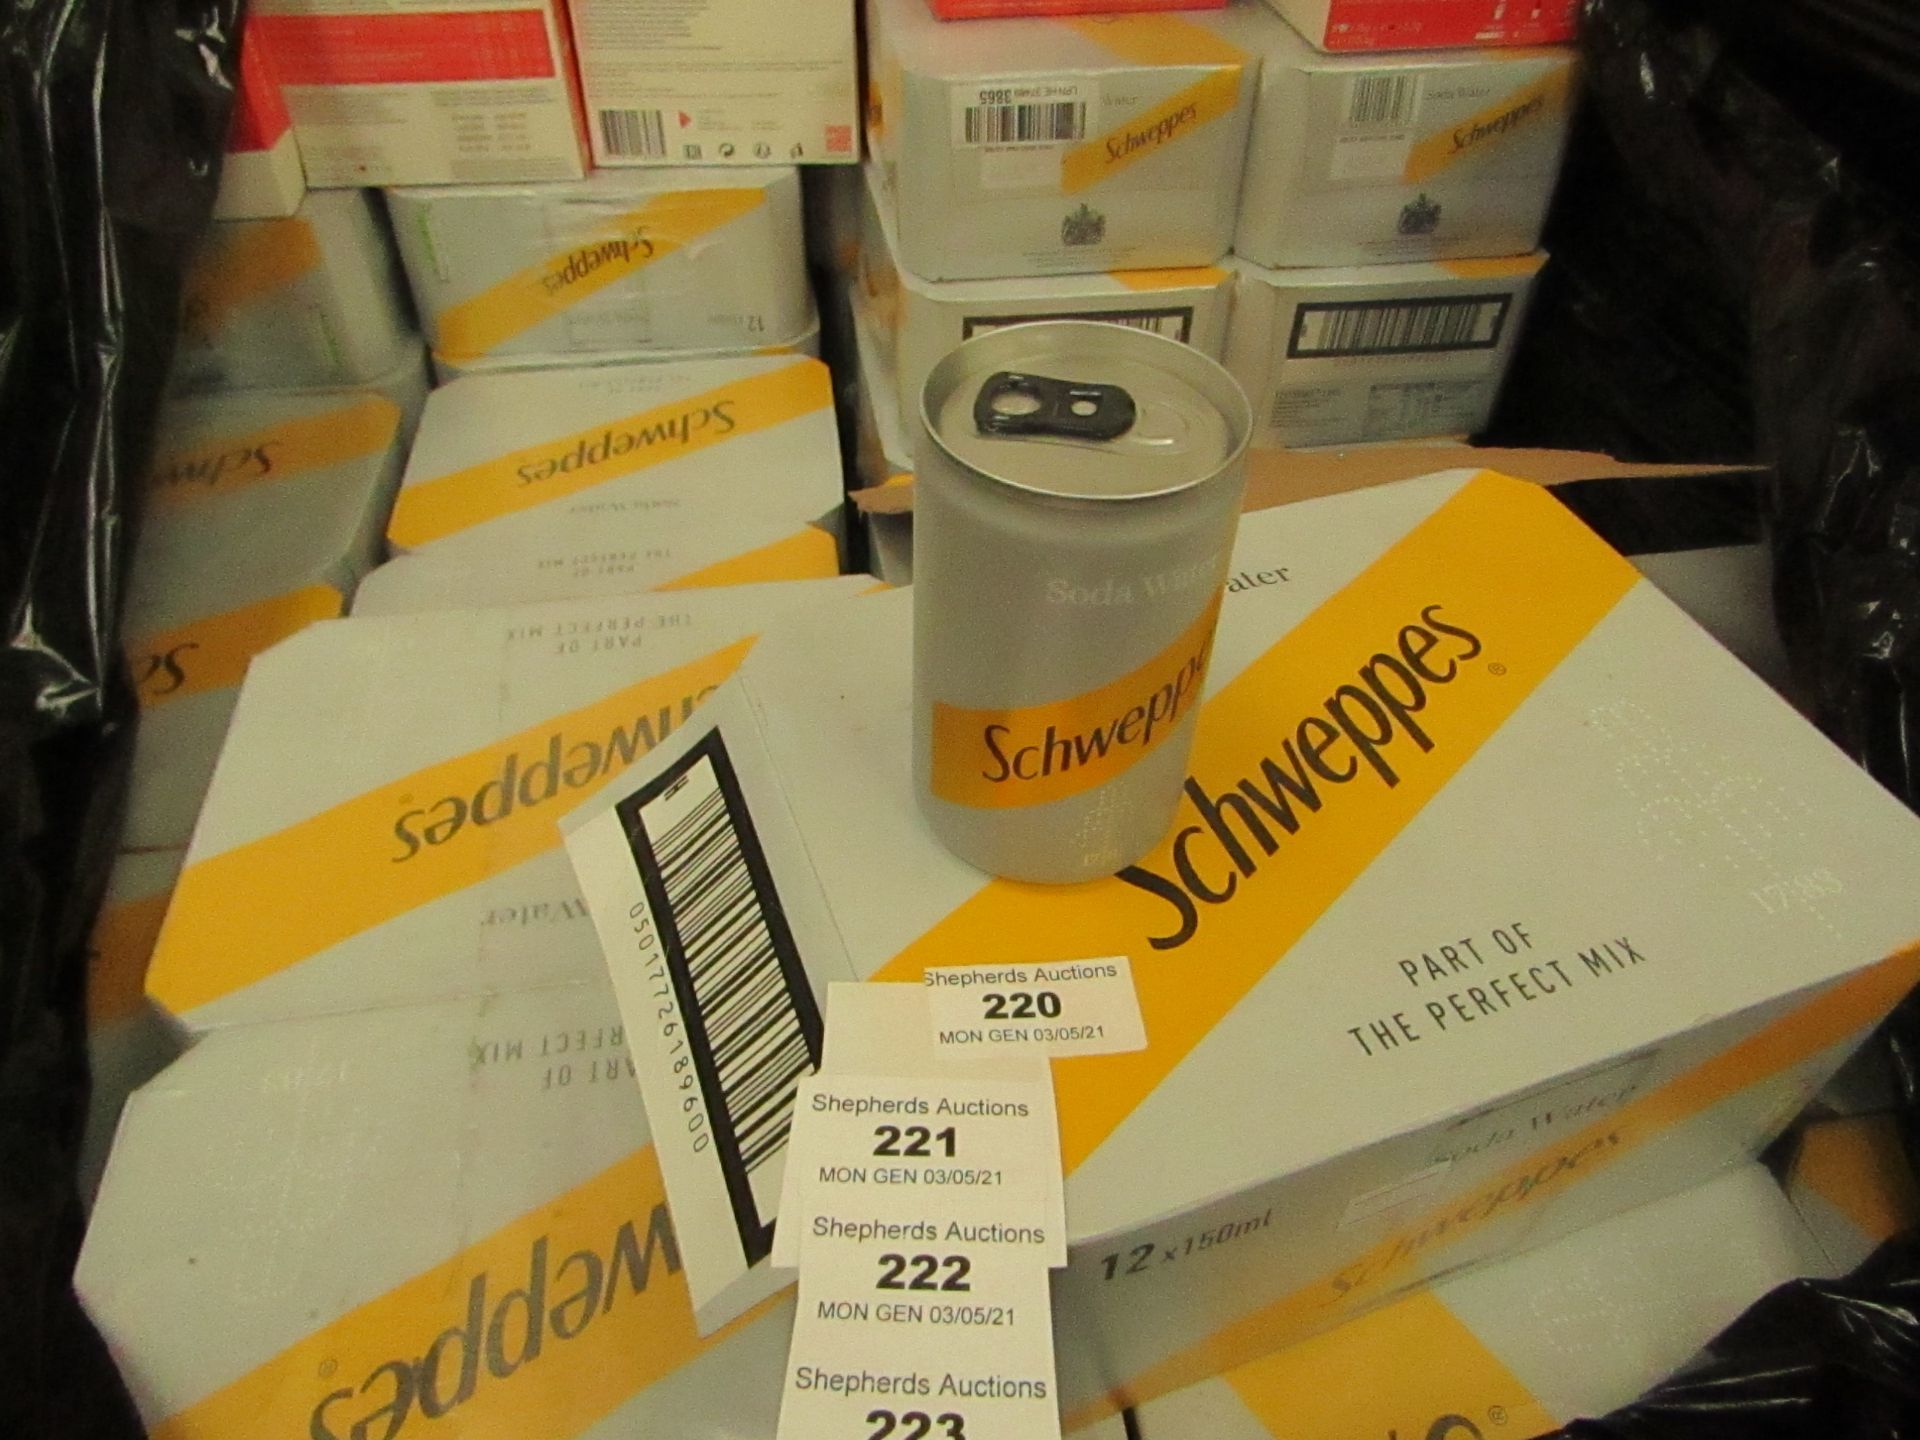 3x Packs of 12 Being : Schweppes - Soda Water 150ml Cans - BBD 31/05/20 - Unused & Boxed.